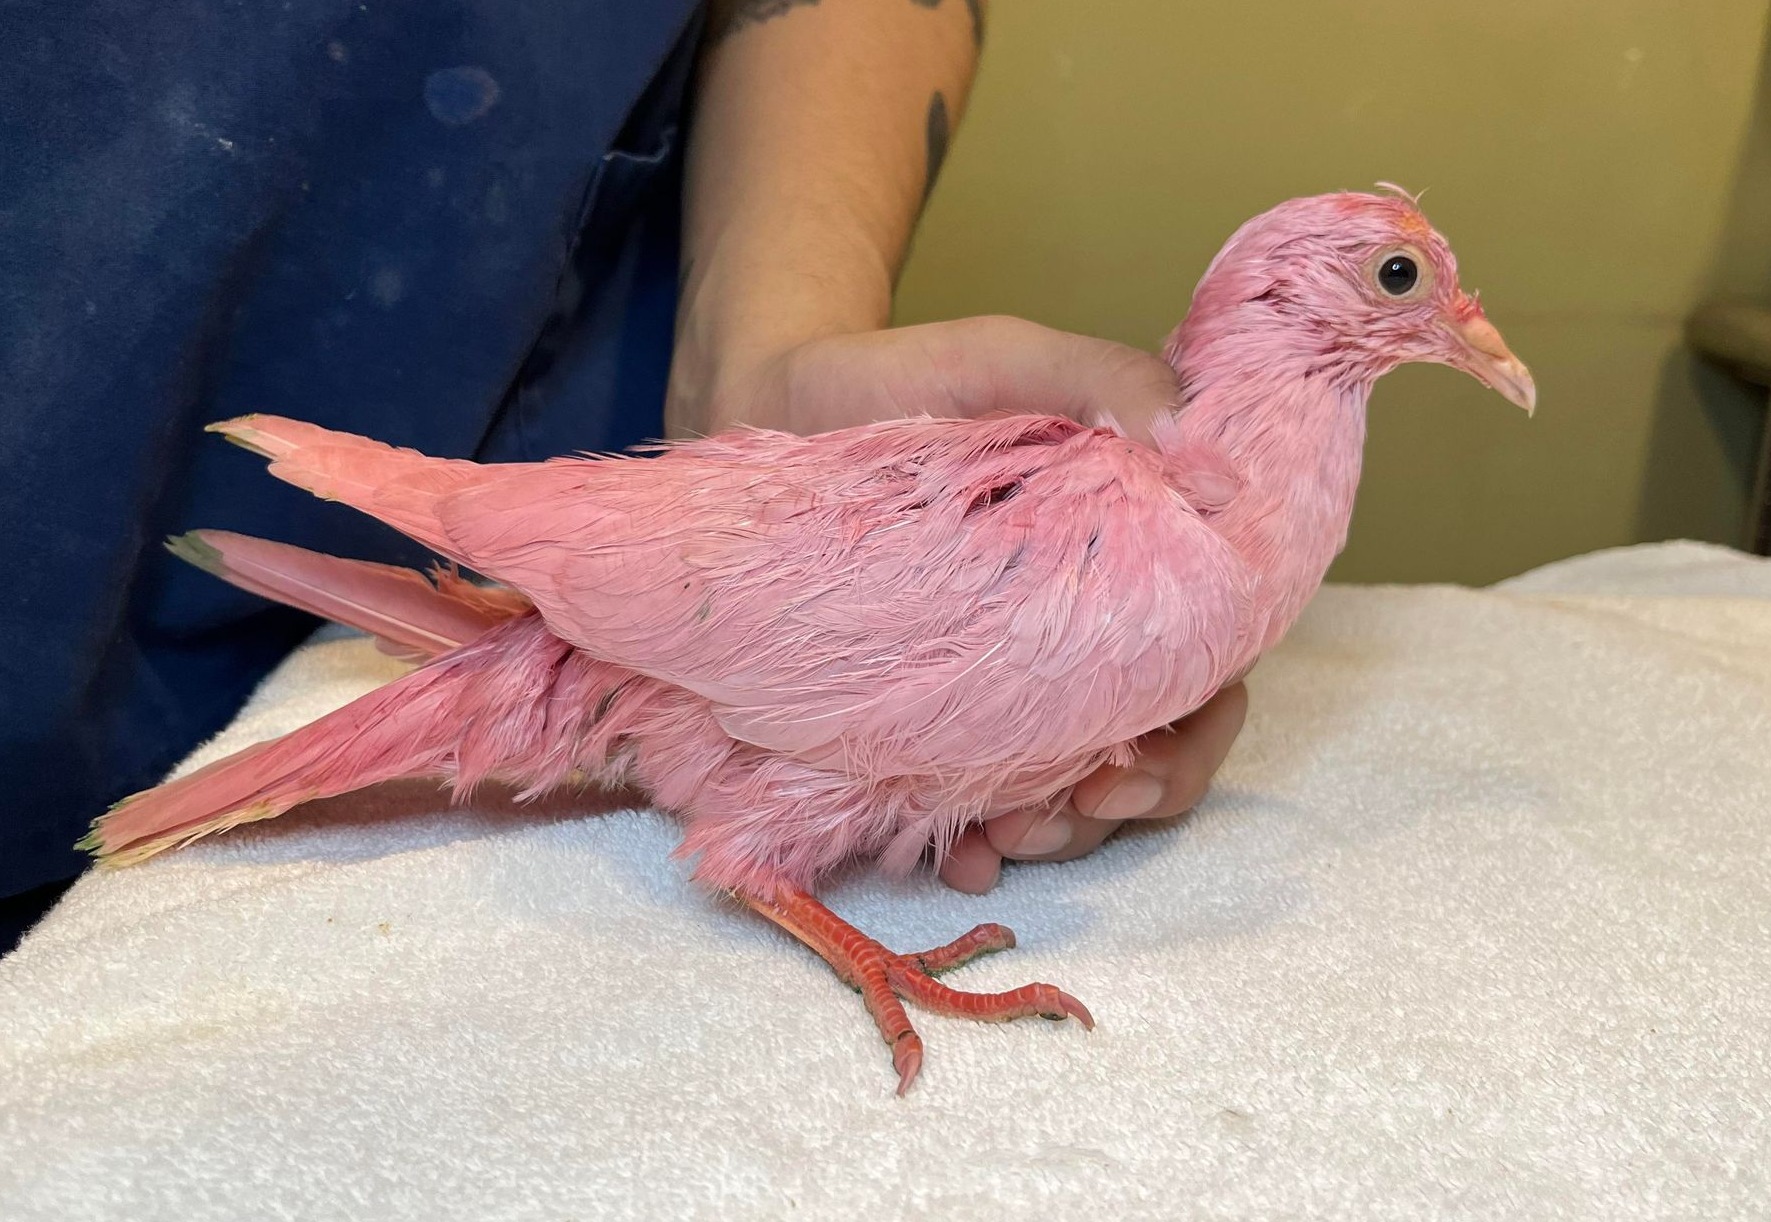 Pink pigeon possibly dyed for gender reveal party in NYC dies - National |  